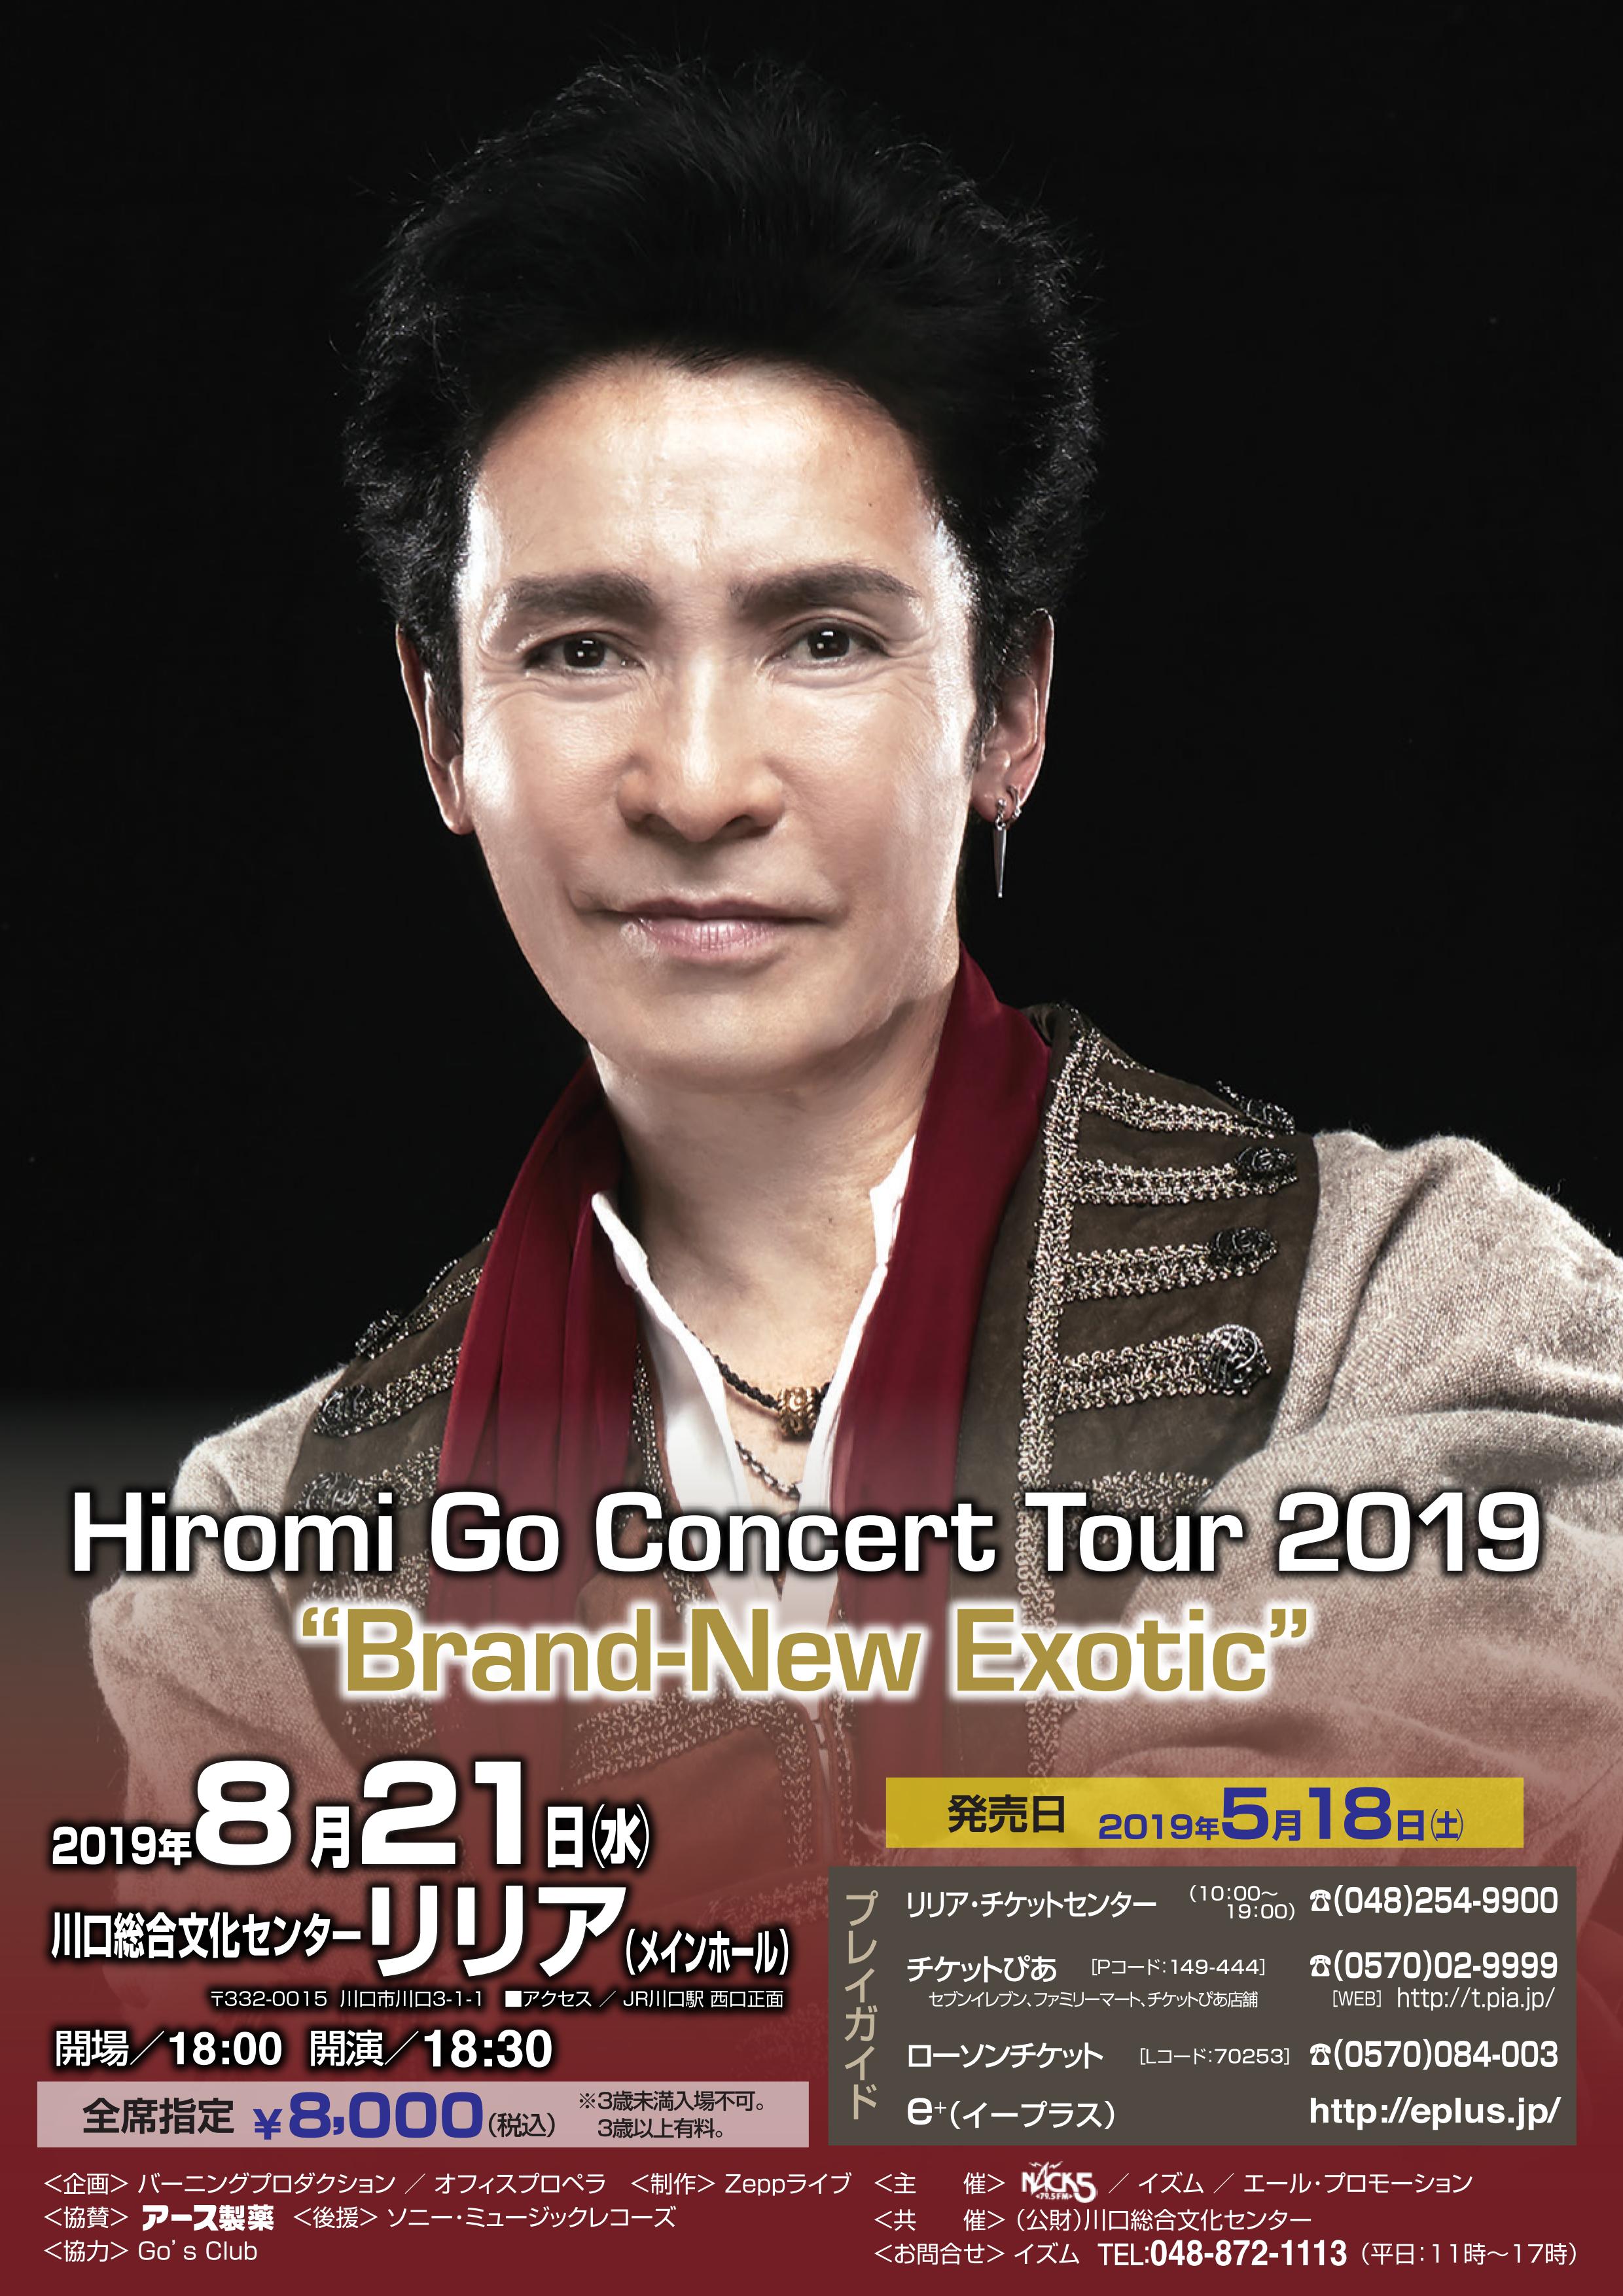 Hiromi Go Concert Tour 2019 “Brand-New Exotic” | エール・プロモーション